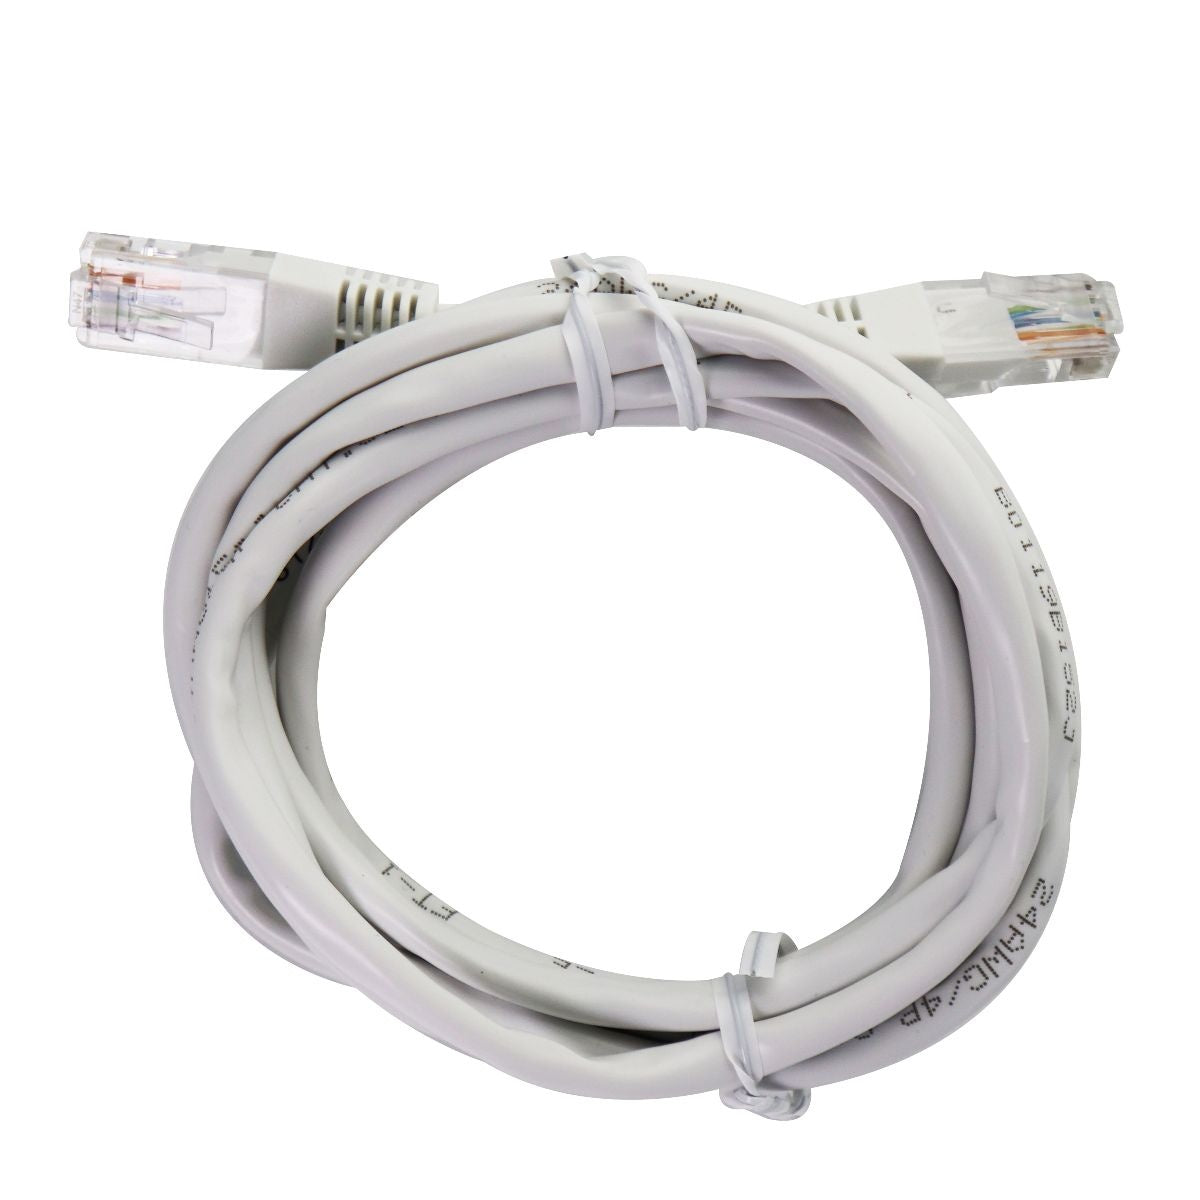 6.5-Foot CAT 5E Ethernet Patch Cable (24-AWG) - White Computer/Network - Ethernet Cables (RJ-45, 8P8C) Unbranded    - Simple Cell Bulk Wholesale Pricing - USA Seller